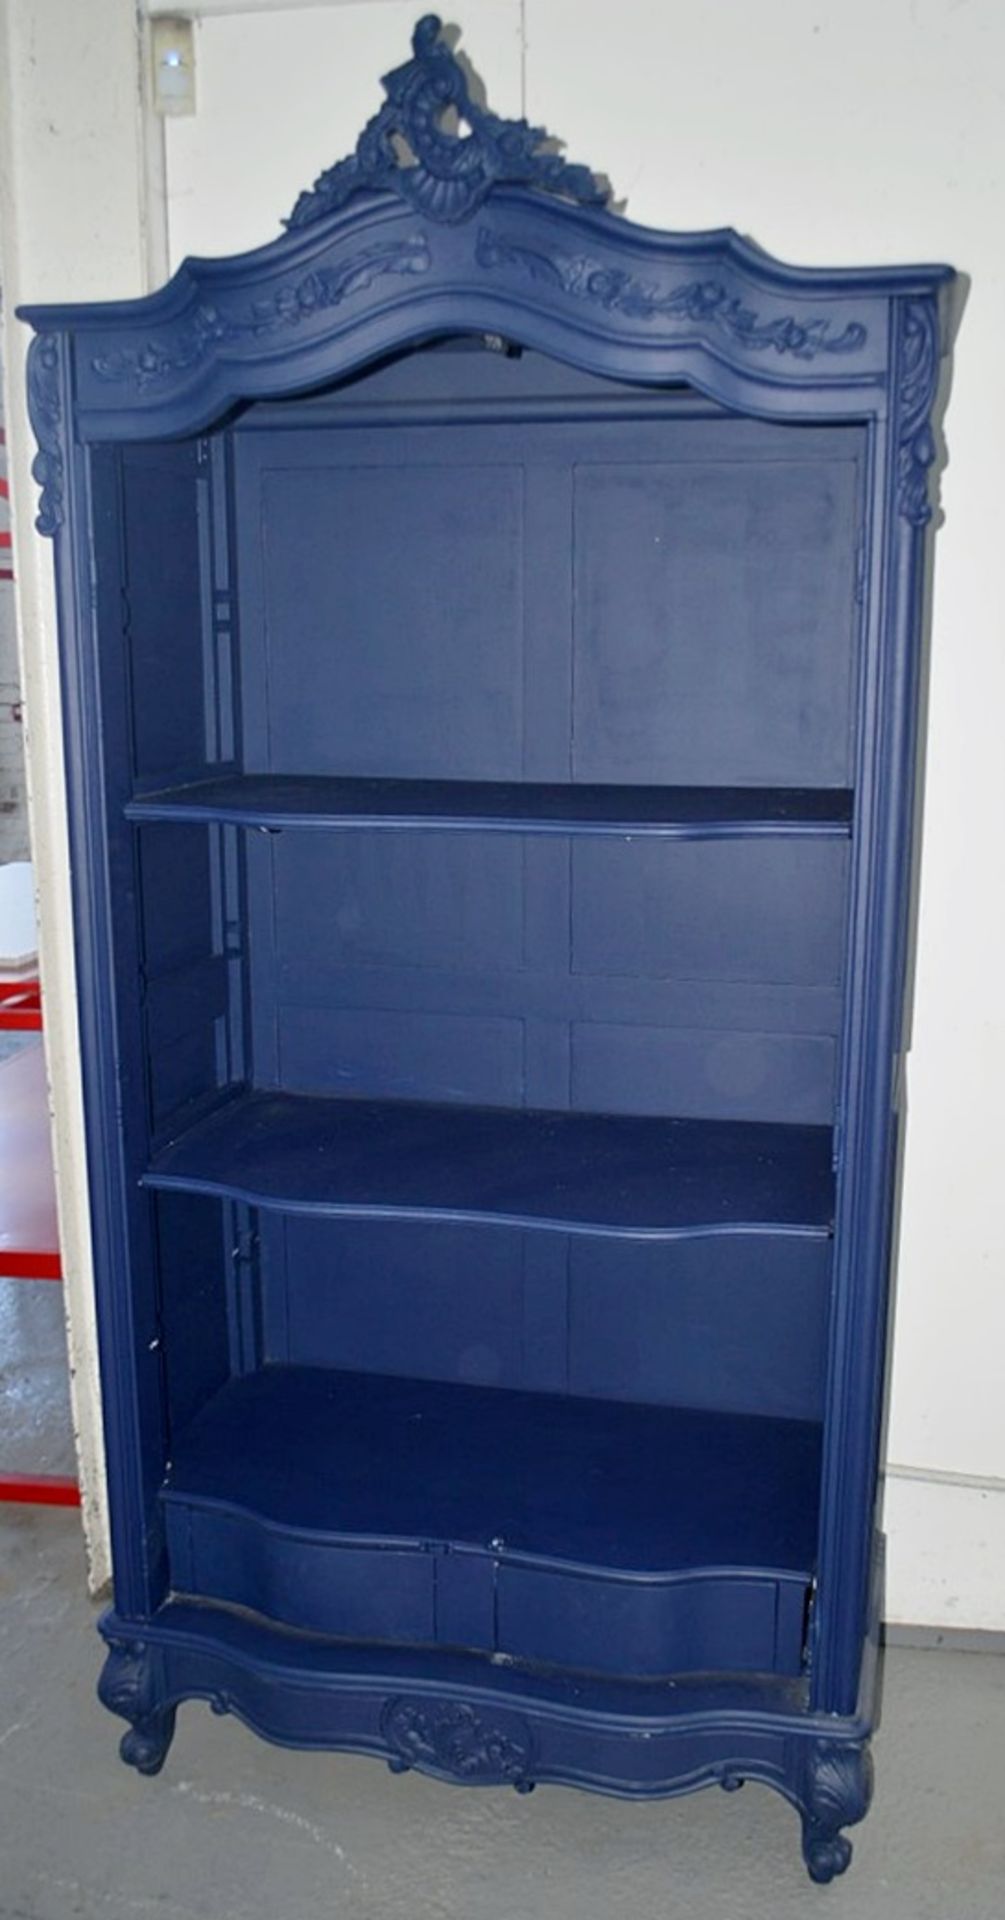 1 x Armoire 2.2-Metres Tall Display Cupboard With Bespoke Deep Blue Paintwork